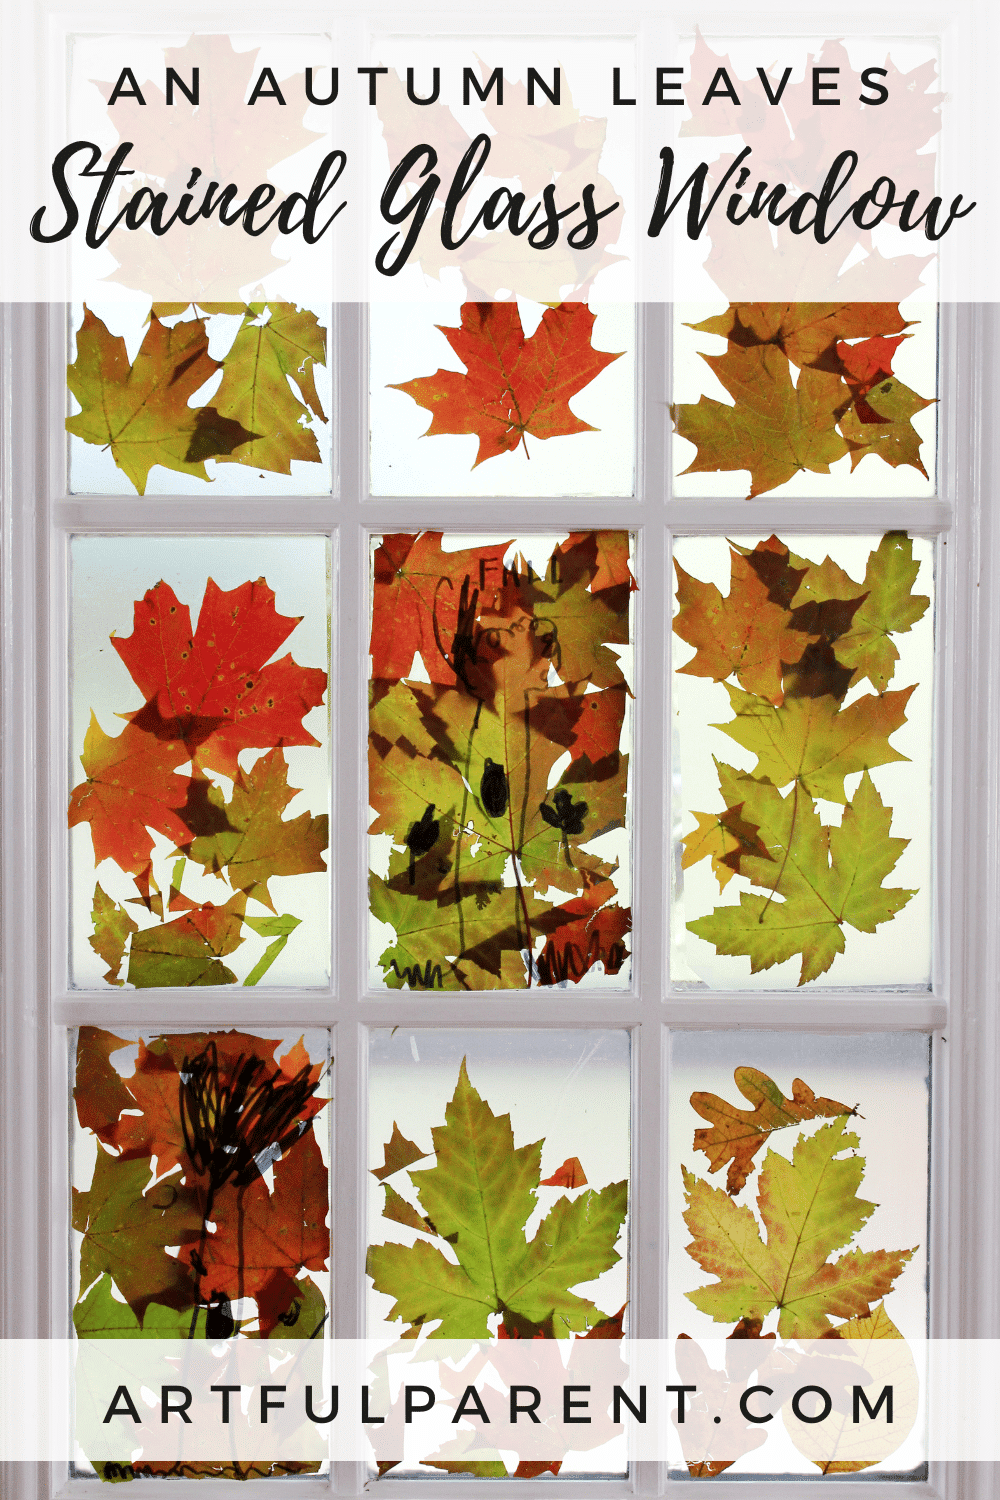 HAOSUM Stained Glass Window Hangings Ginkgo Tree Leaf Fall Autumn Decoration Thanksgiving Home Decoration Thanksgiving Gift 2PCS 4x3 Inches 